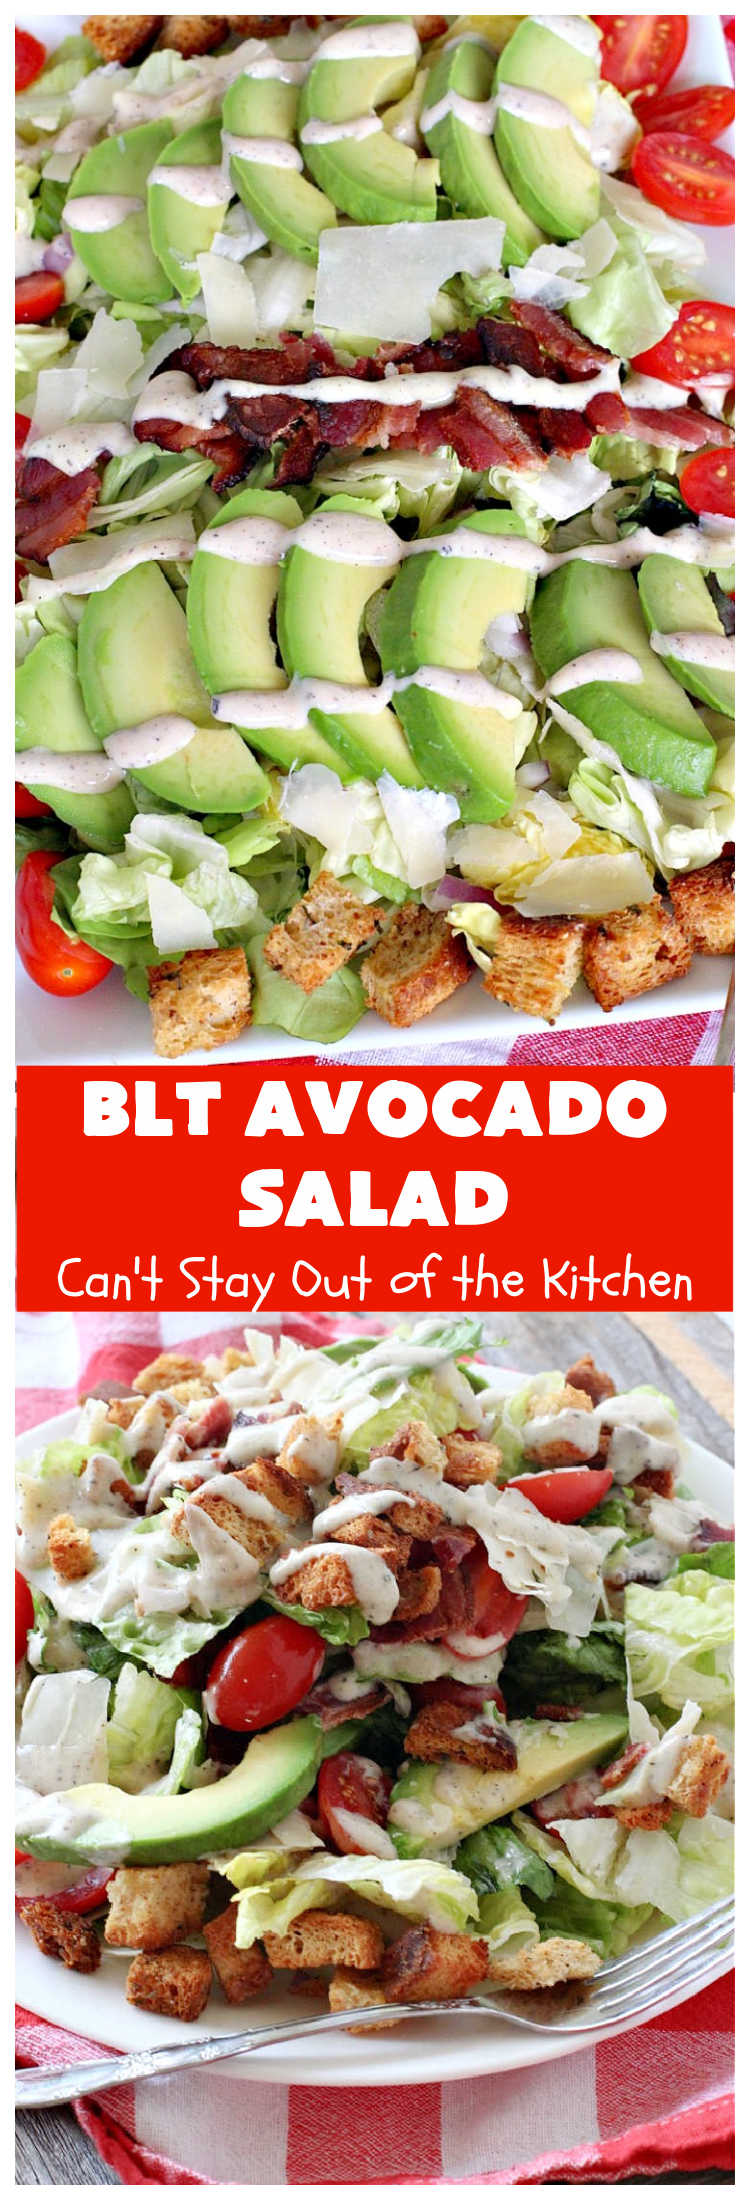 BLT Avocado Salad | Can't Stay Out of the Kitchen | we loved this delicious #bacon, lettuce & #tomato #salad with #avocados. So filling and satisfying. I made it healthier by using uncured, nitrate-free #bacon & homemade #GlutenFree croutons. Terrific for company dinners. #BLT #BLTSalad #BLTAvocadoSalad